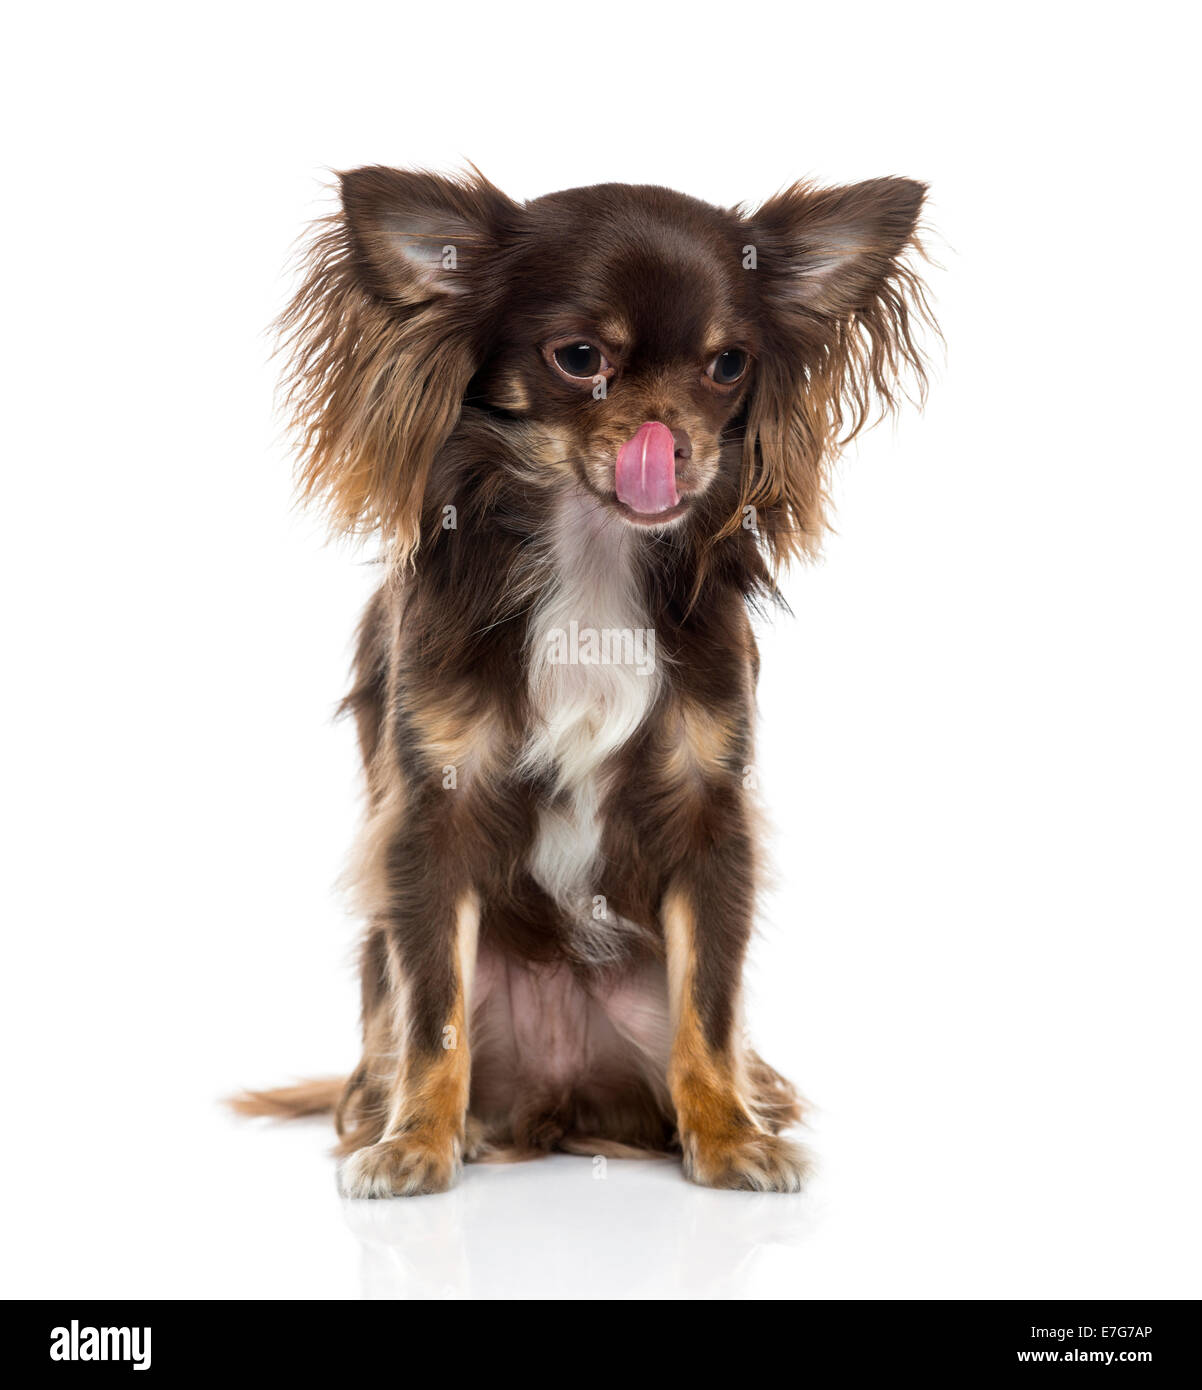 Chihuahua licking its lips against white background Stock Photo